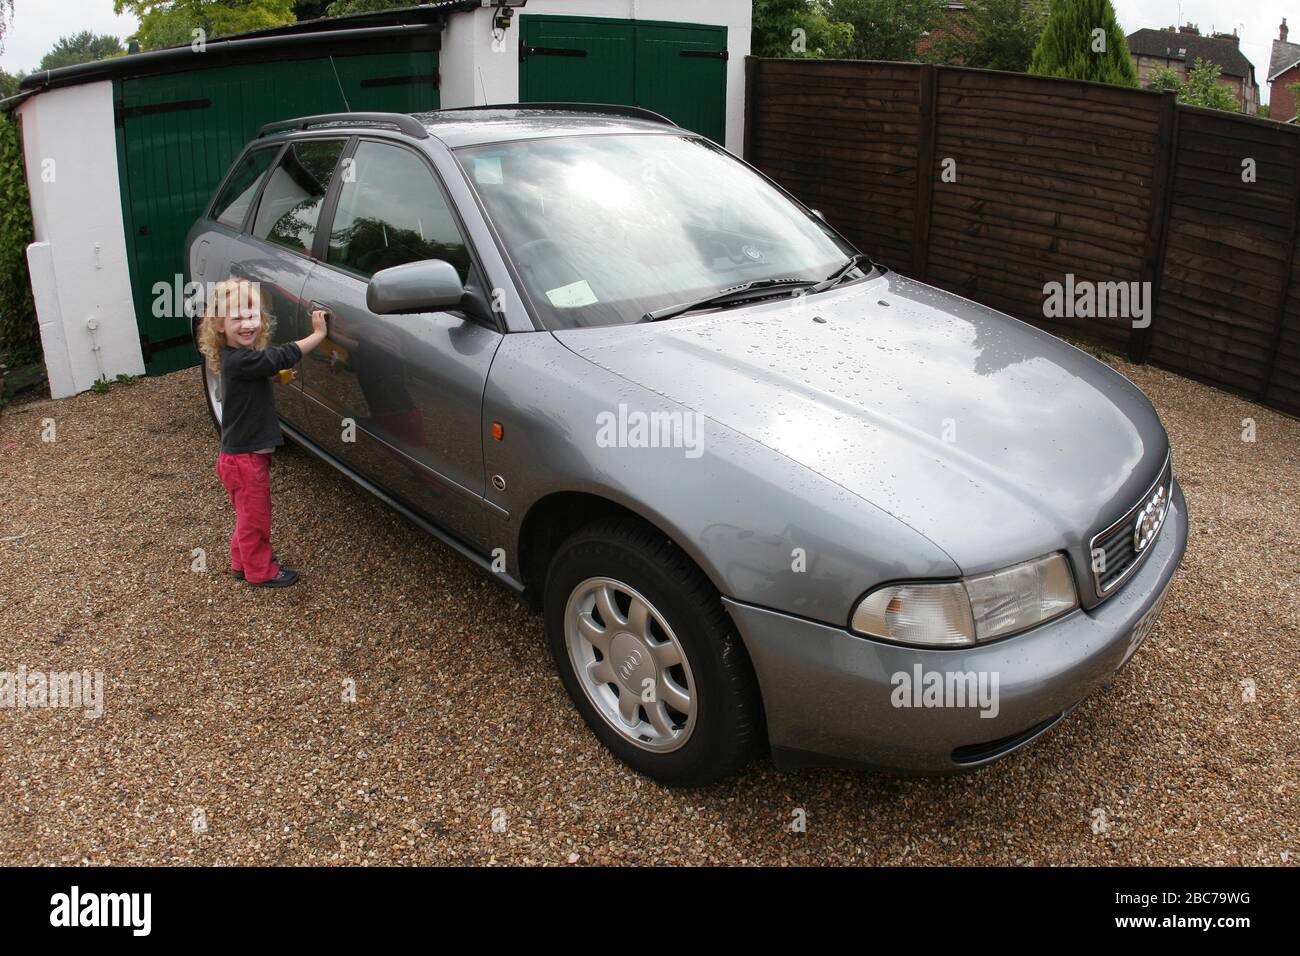 When can I drive the car? A young girl beside the driver's door of the family car - a 1996 Audi A4 Avant. Taken in Salisbury, Wiltshire UK 2005. Stock Photo